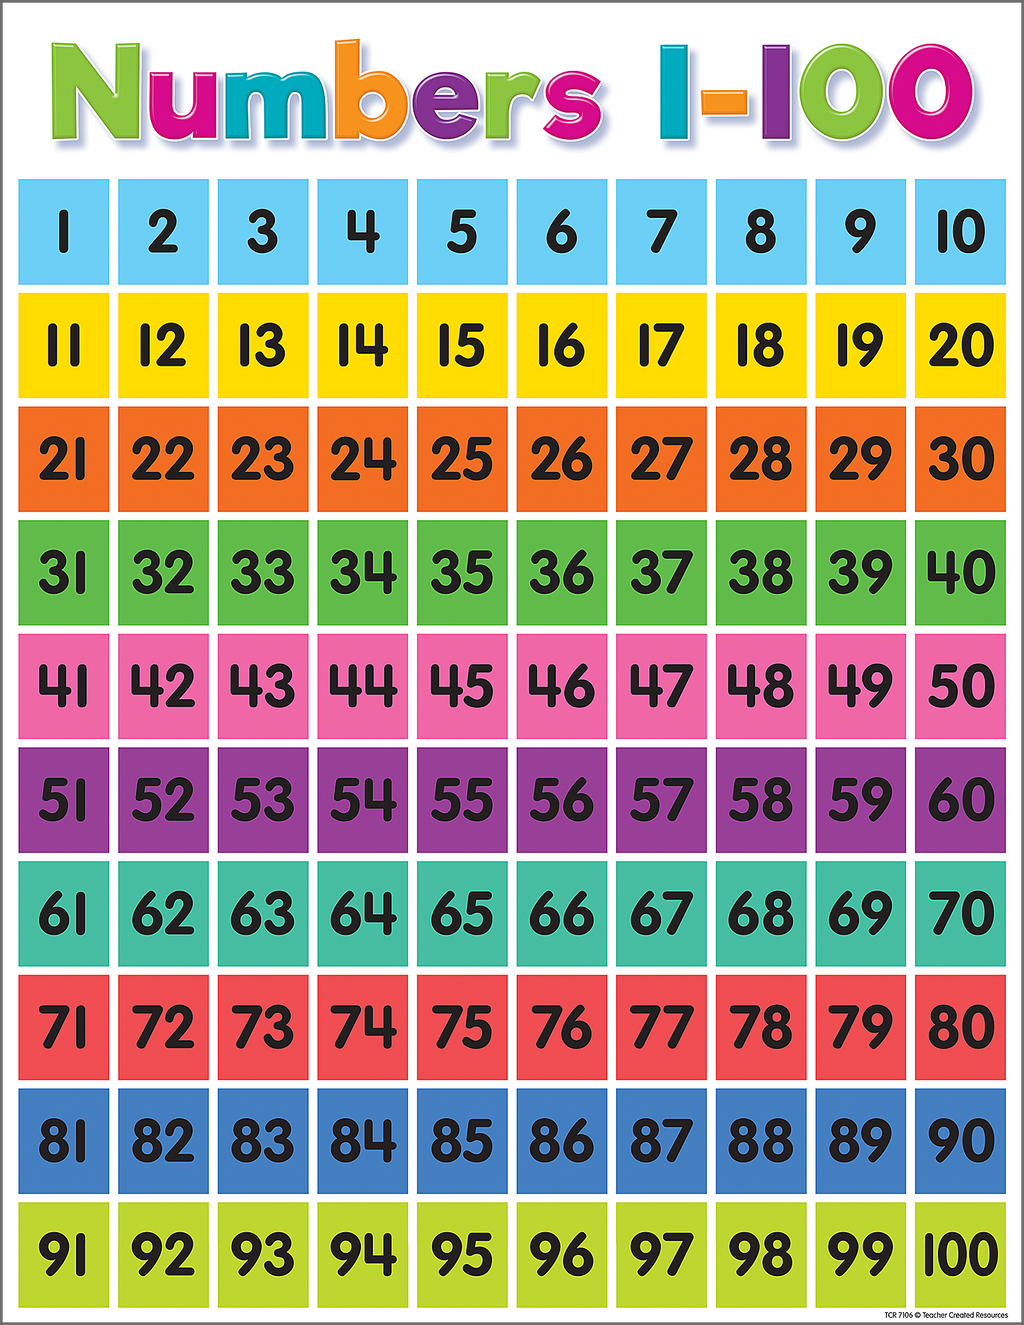 Multiplication Table Fill in the Blank, Times Table Poster, at Home  Learning, Primary School Materials Bundle Printable -  Sweden